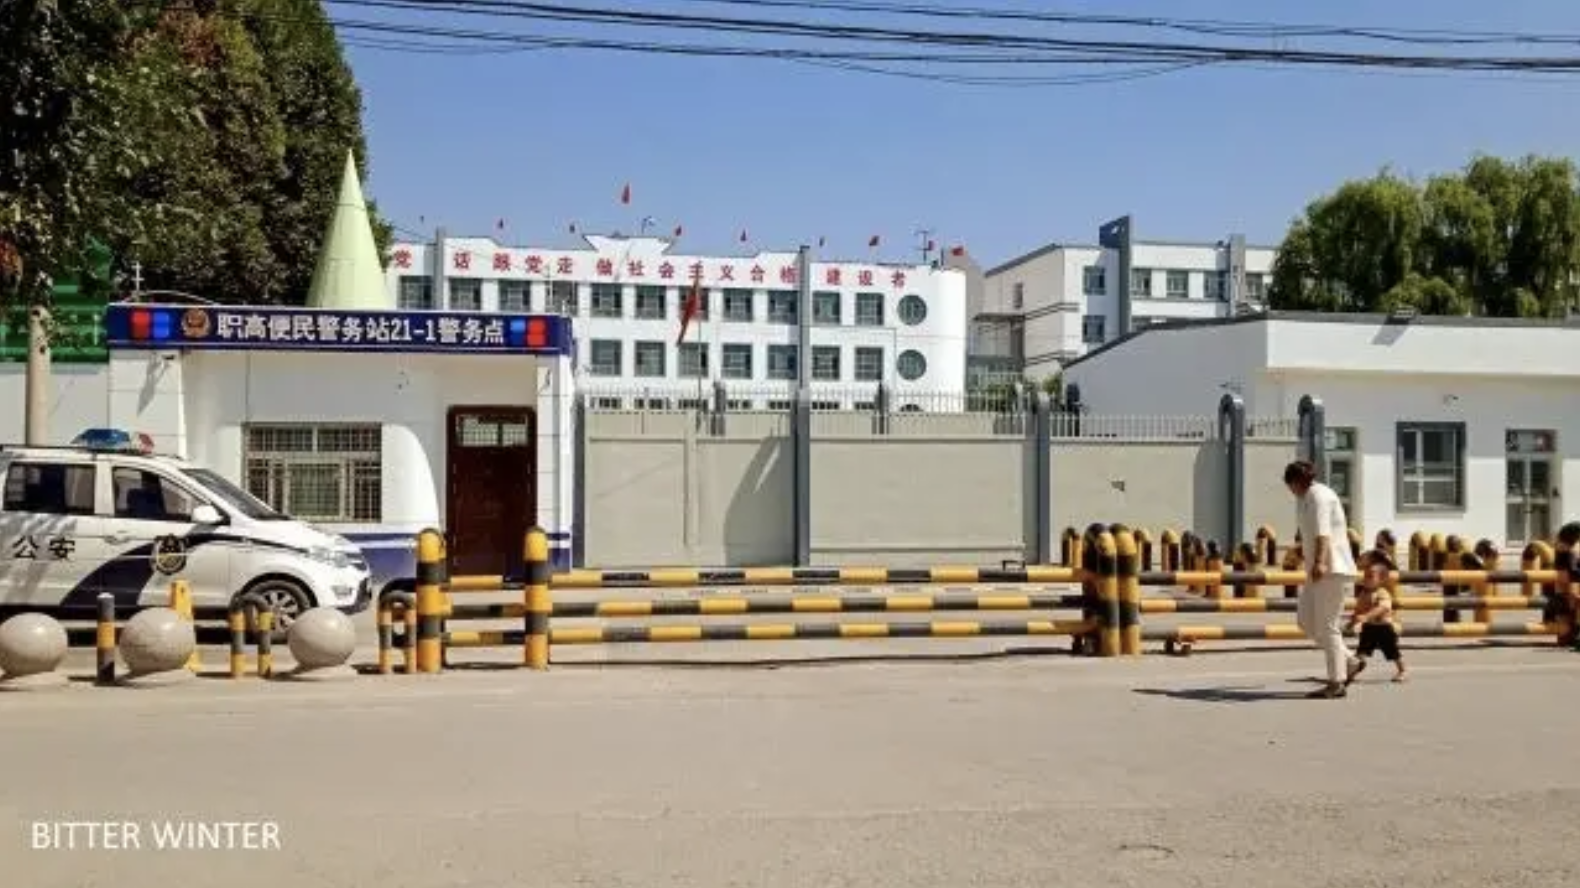 The front entrance of the former Third Middle School in Qapqal Xibe, where Kokteubai's daughter went to school. Image courtesy of Bitter Winter. China, 2020. 